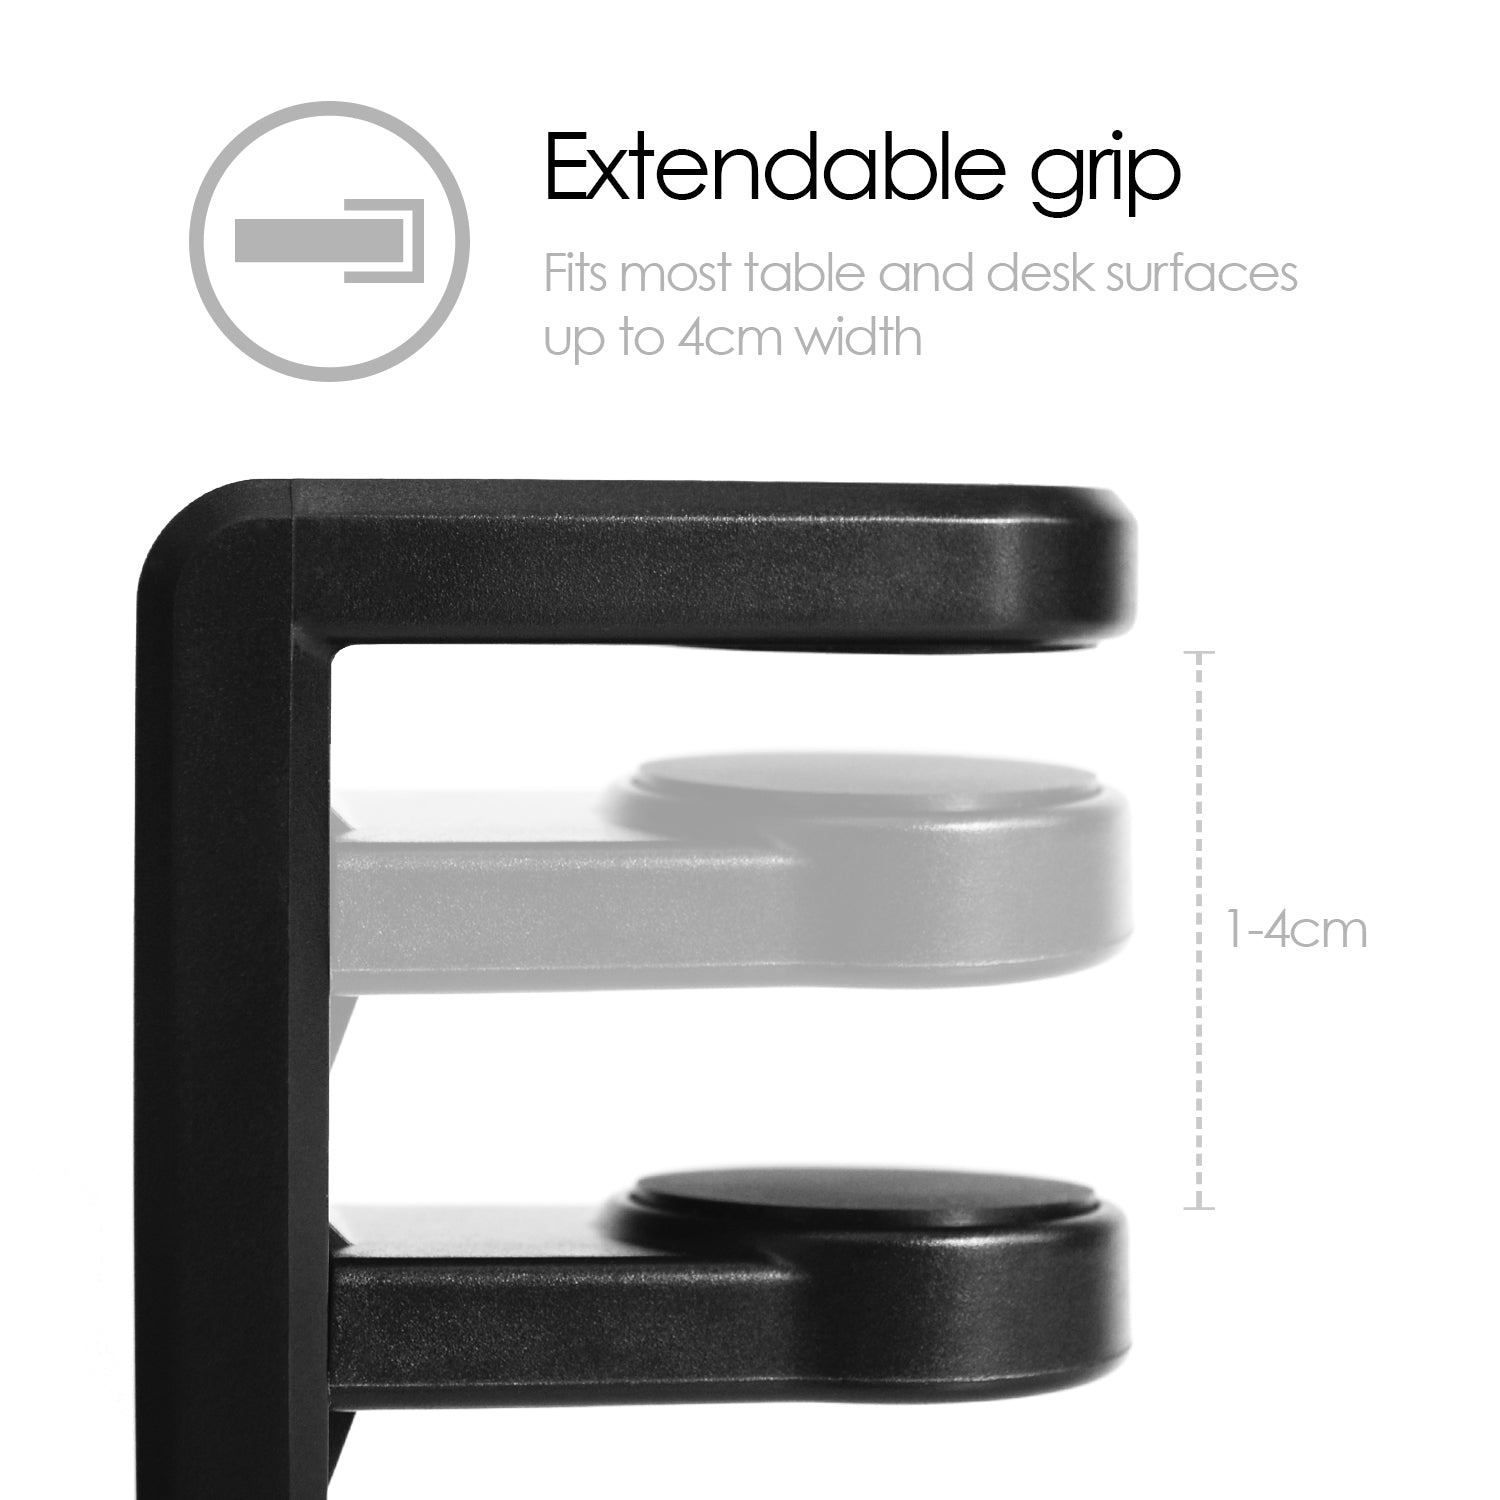 Extendable grip of headphone hanger. fits most tables and desk surfaces up to 4cm width 